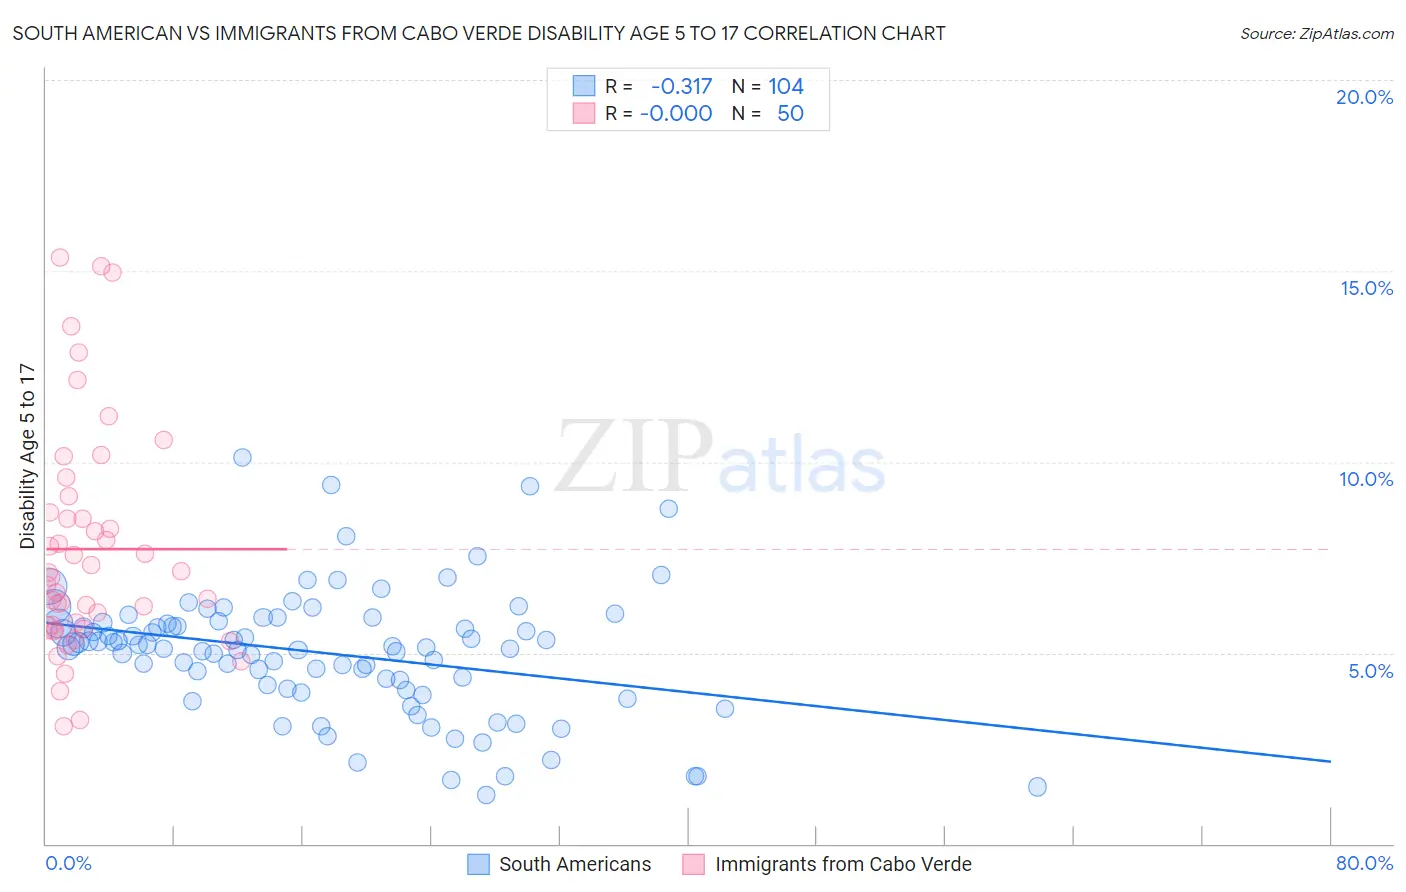 South American vs Immigrants from Cabo Verde Disability Age 5 to 17